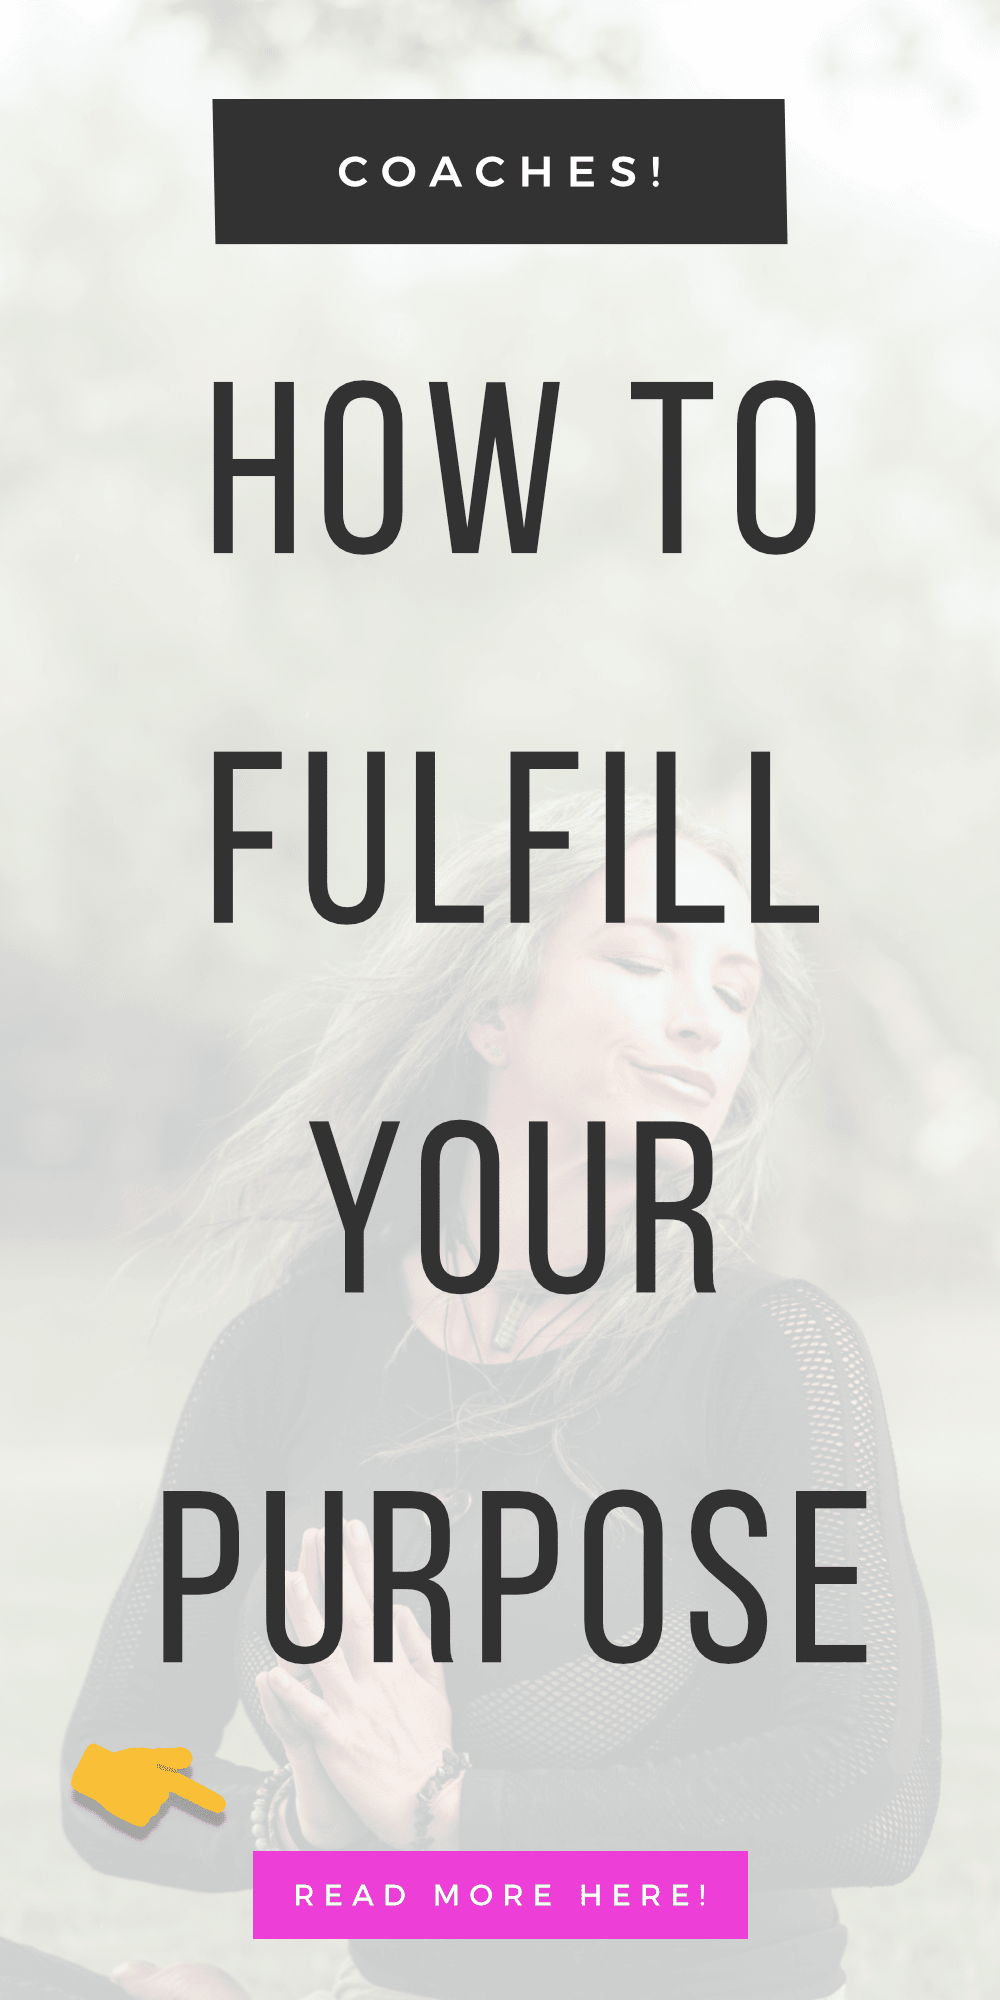 6 Ways To Fulfill Your Purpose